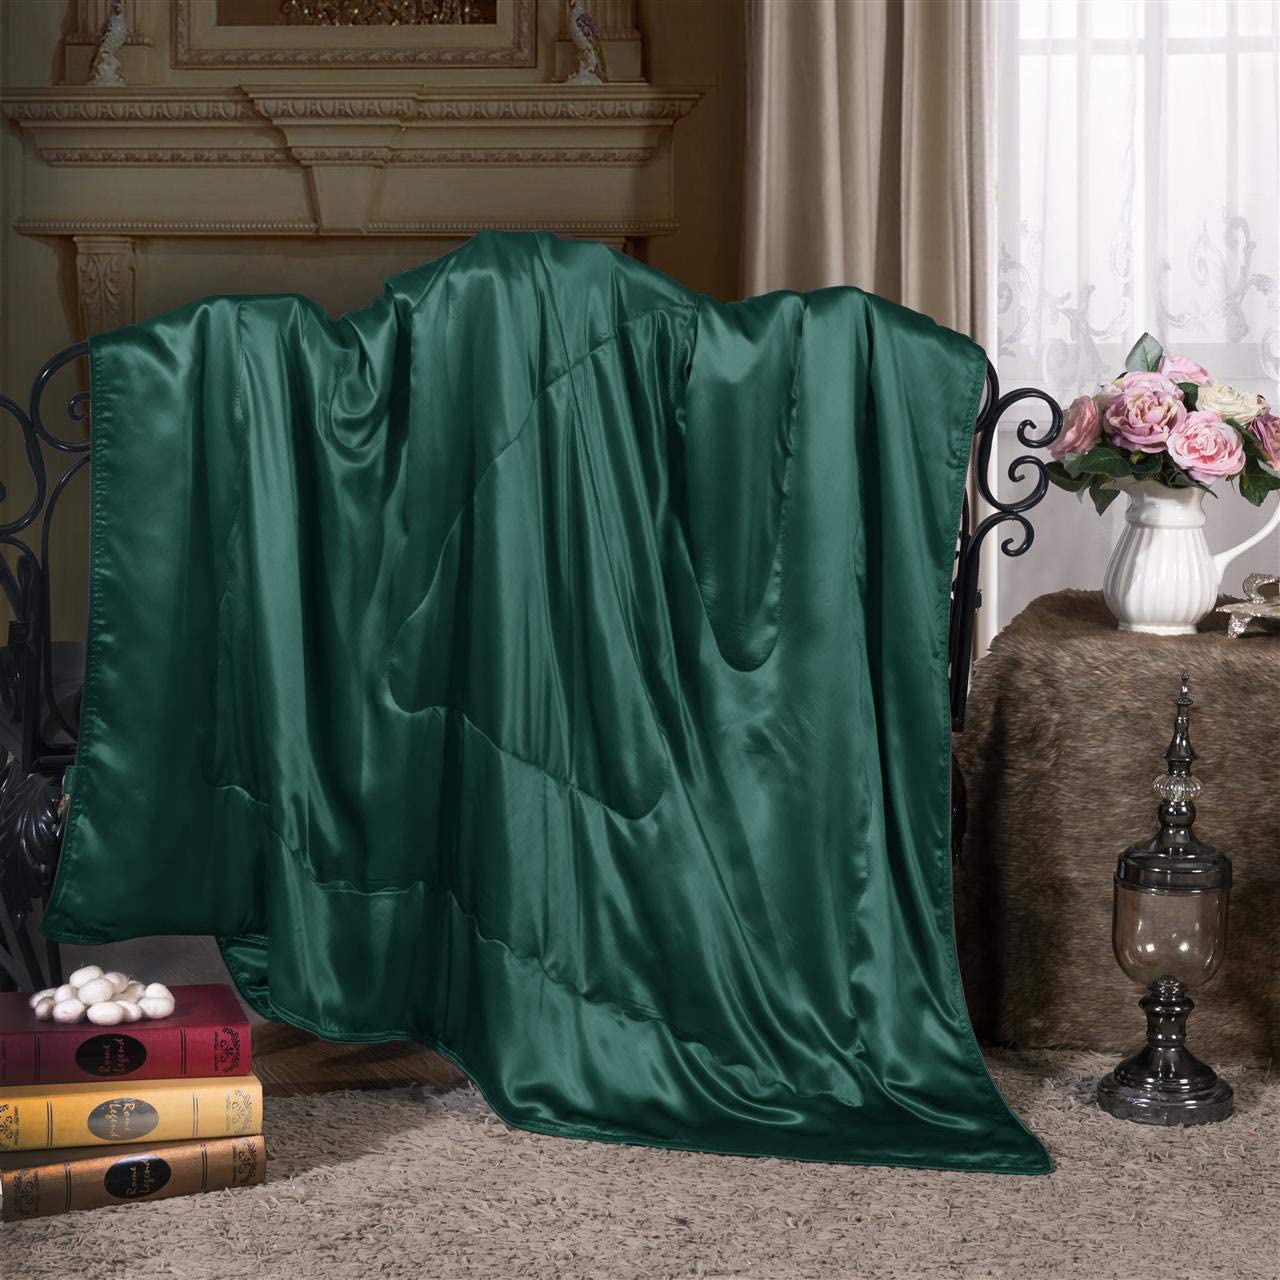 thumbnail 4 - Cozysilk Pure Silk Throw Blanket, 100% Mulberry Silk Inside and Outside, Pure Si